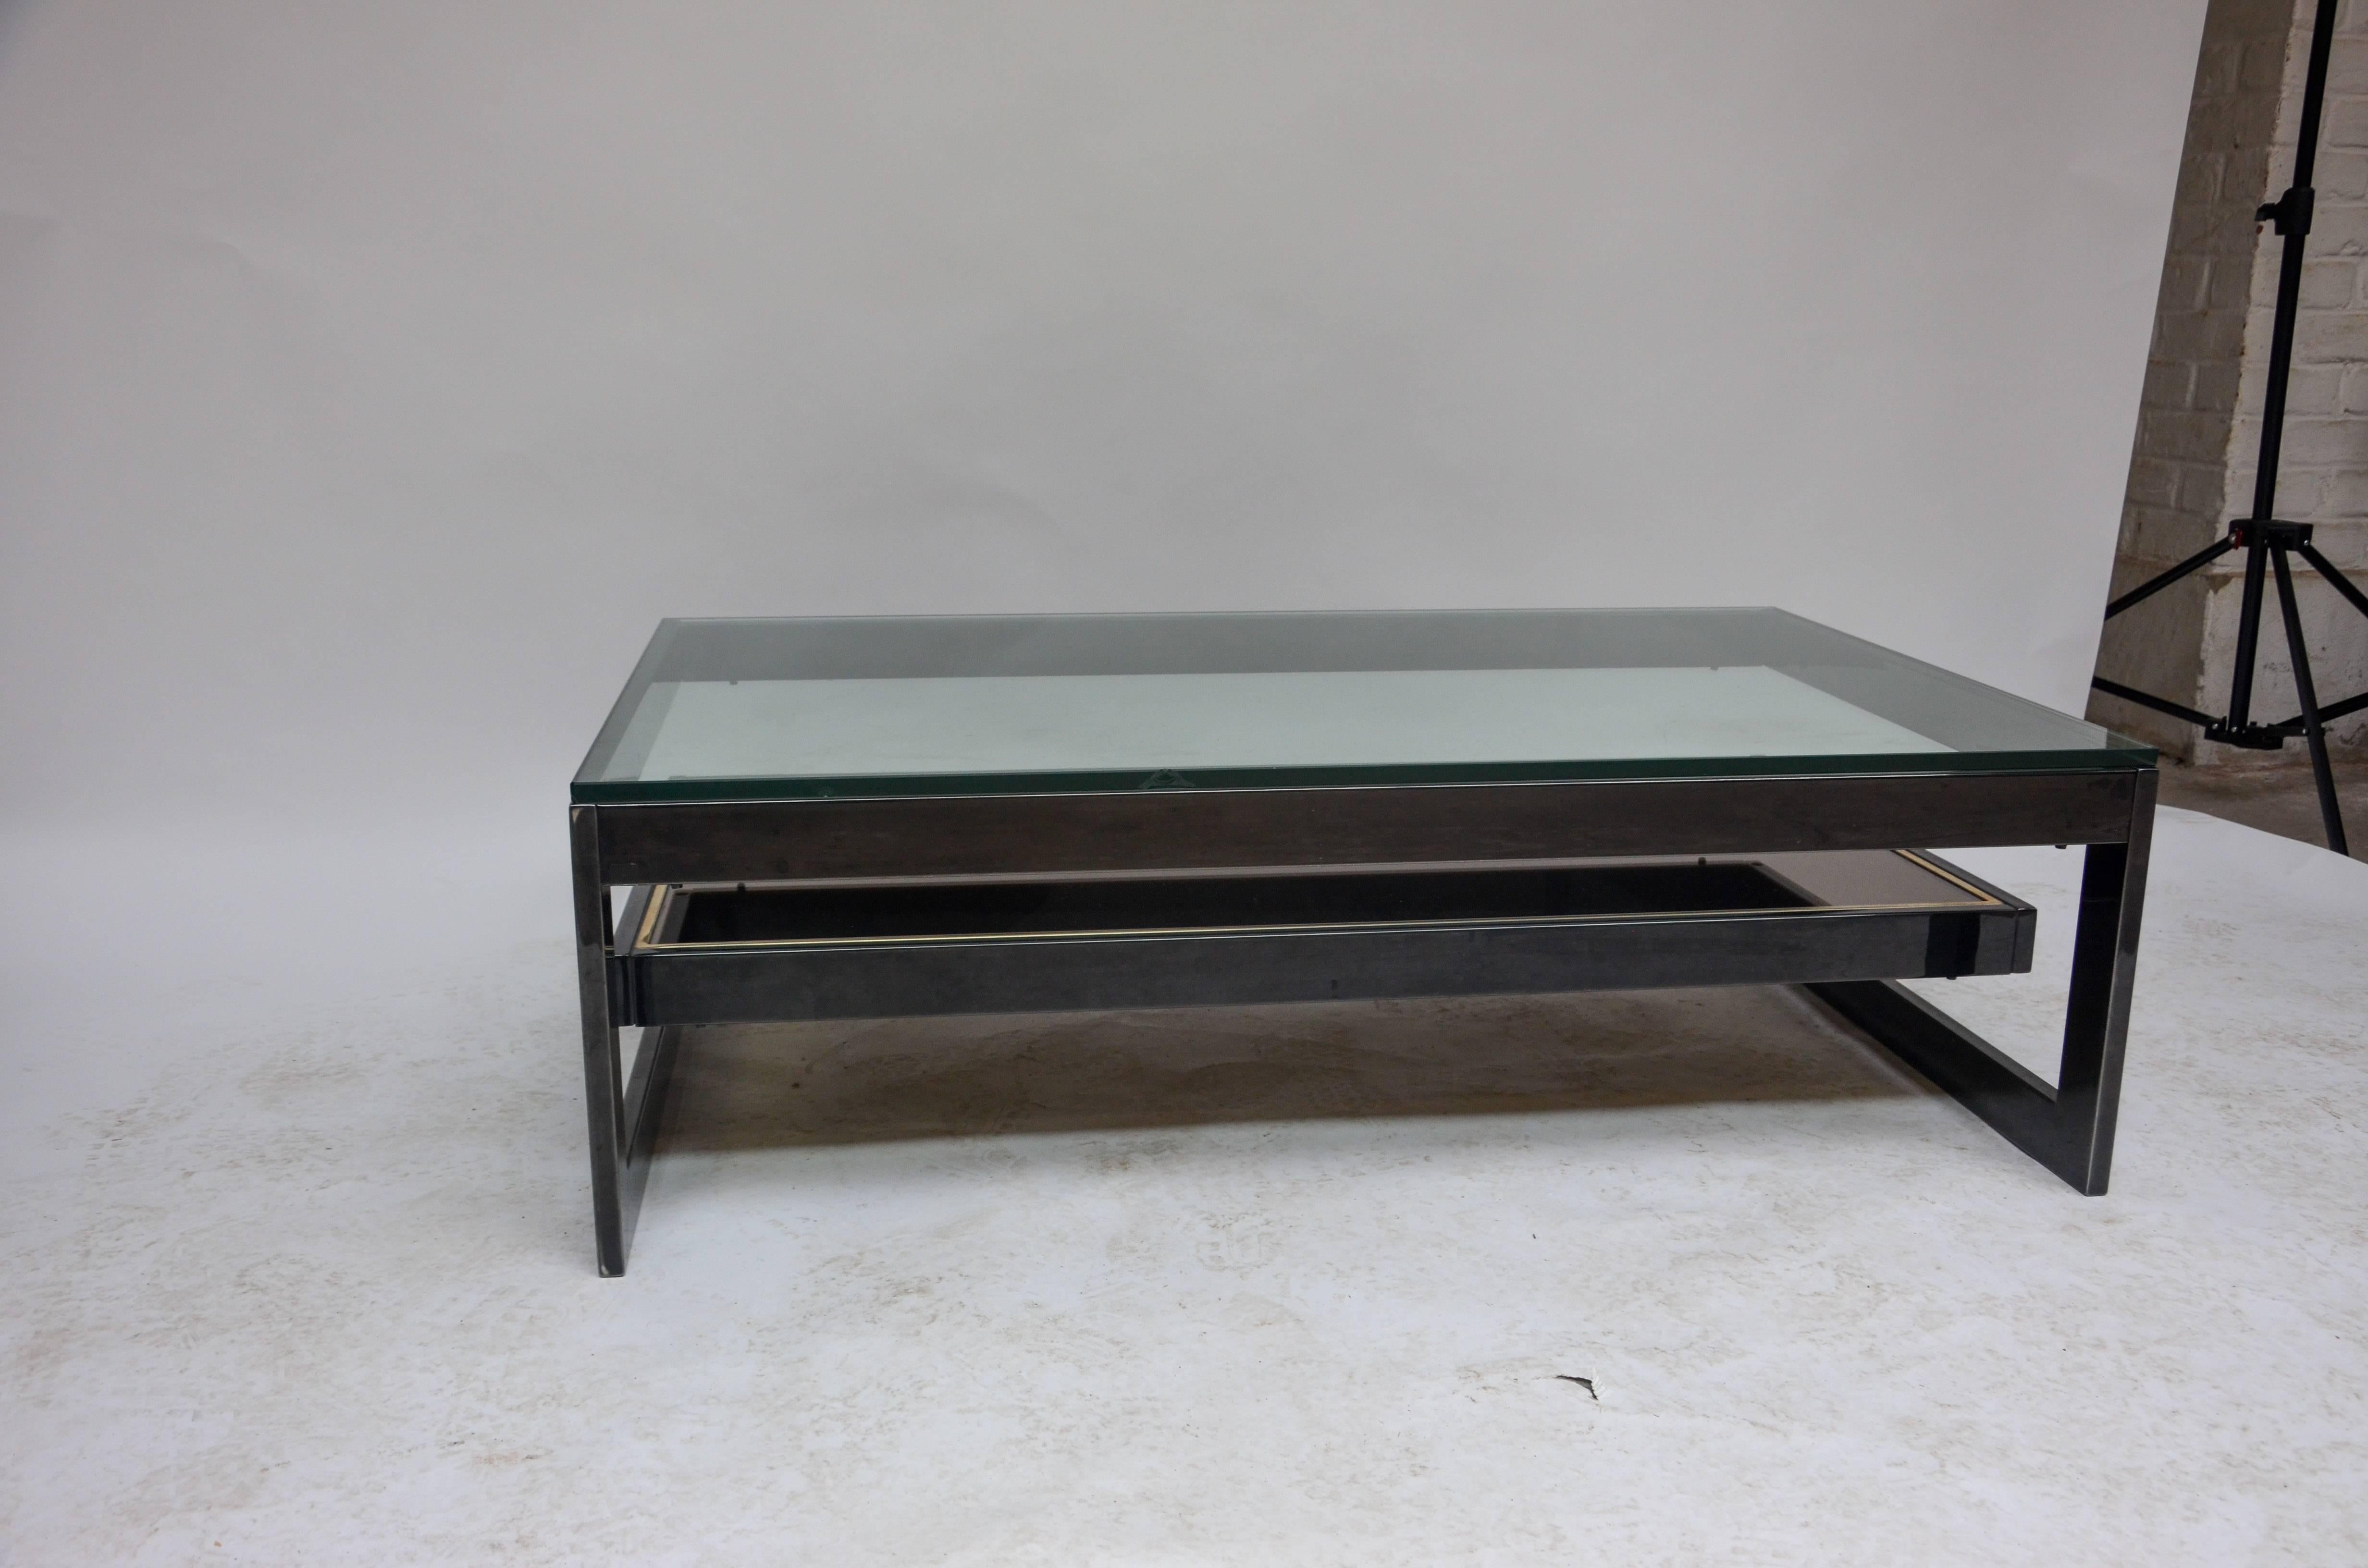 Iconic G-shaped coffee table from Belgo Chrome. The table was made in Belgium in the 1980s.